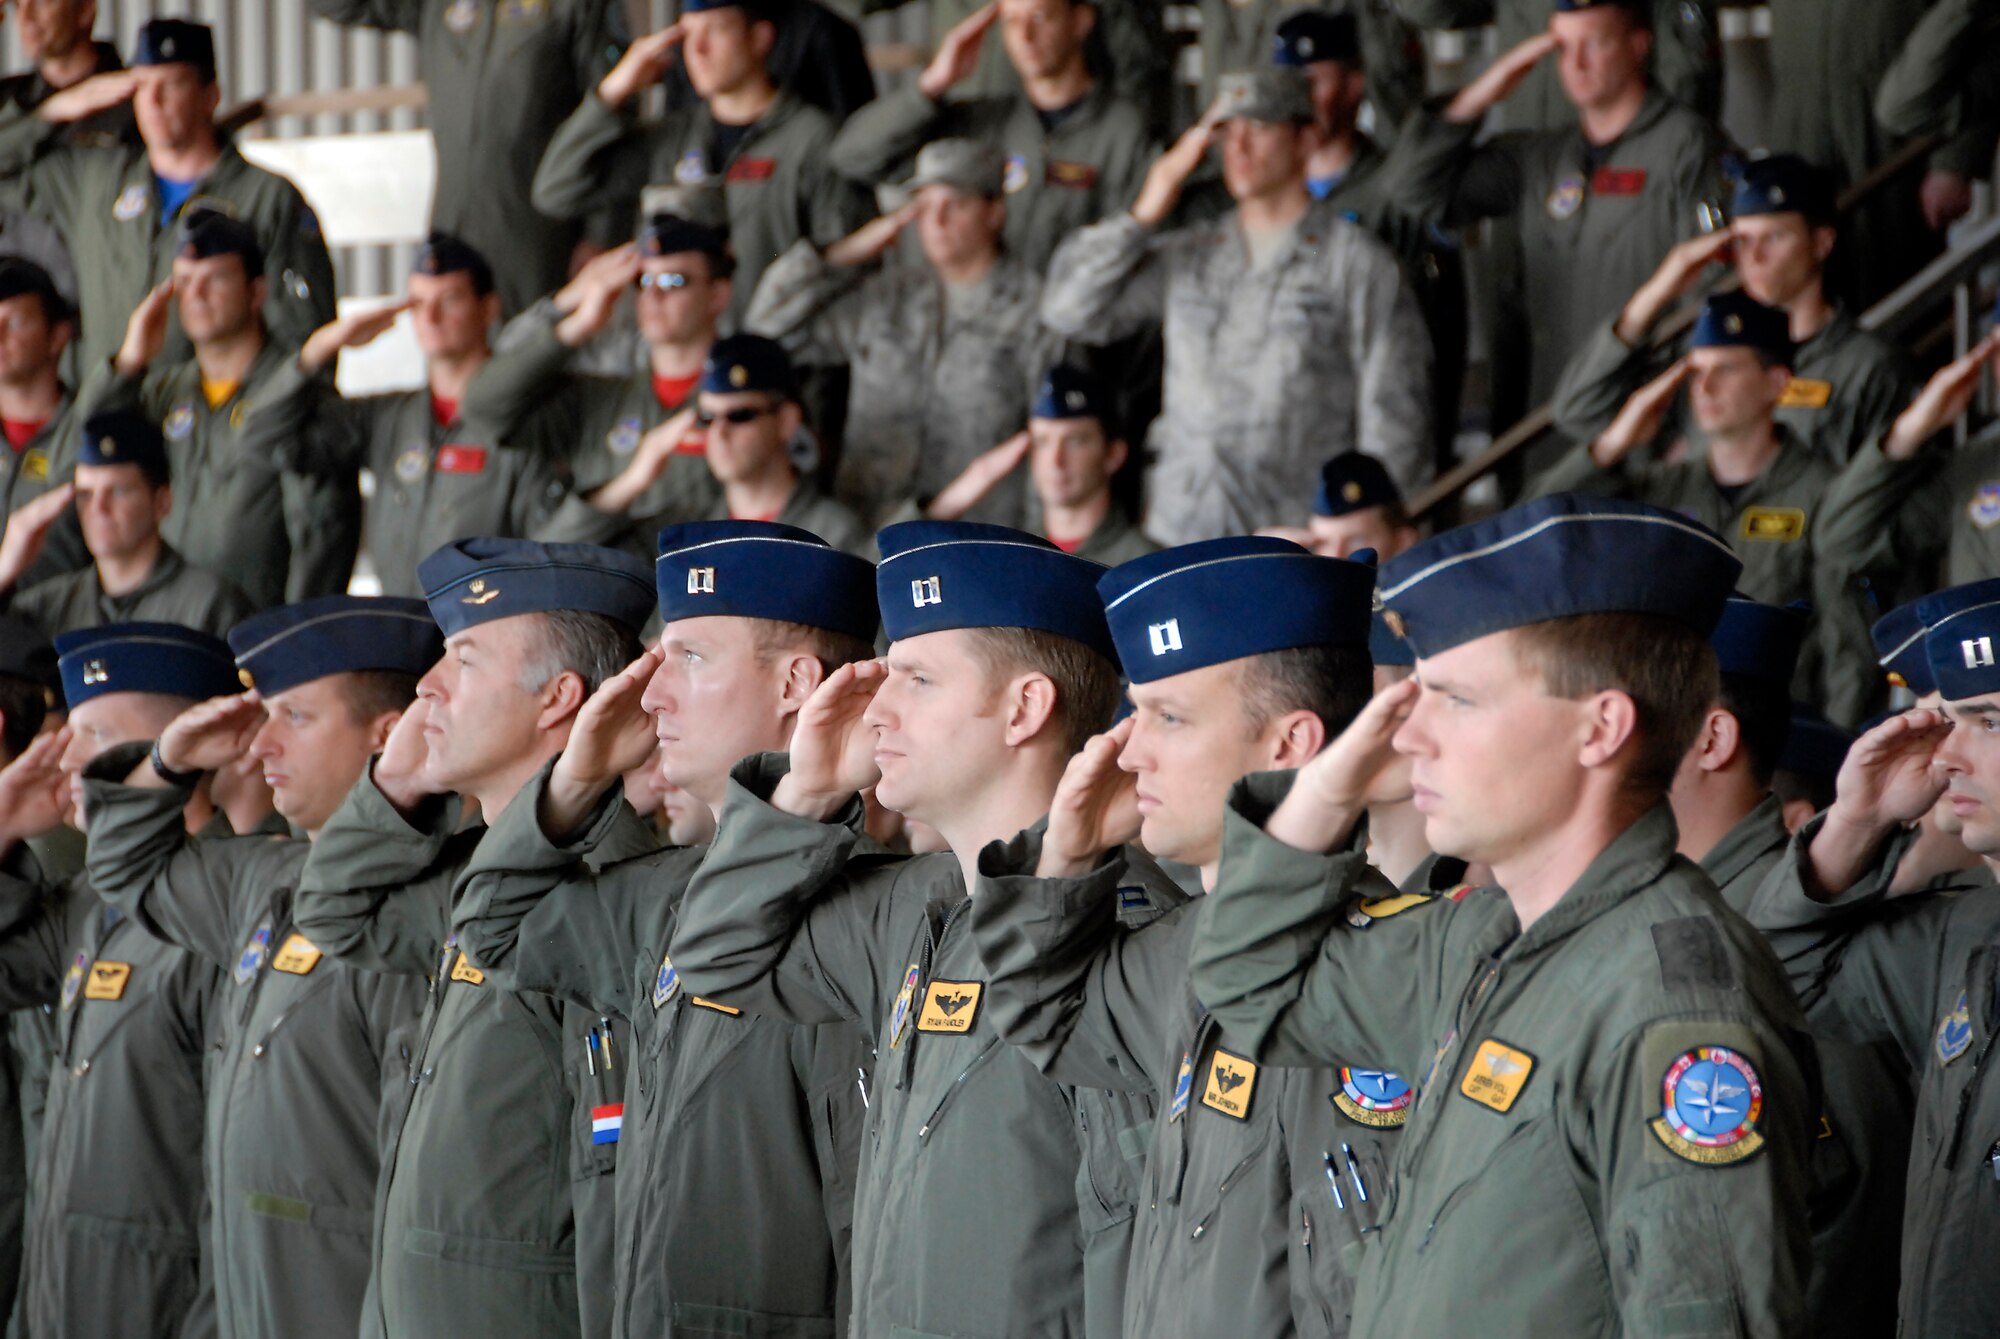 Members of the 90th Flying Training Squadron render one last salute to The Netherlands air force Lt. Col. Harry Osteema, outgoing commander of the 90th FTS, during a change of command ceremony April 10. German air force Lt Col. Oliver Habel assumed command of the squadron. (U.S. Air Force photo/Mike Litteken)